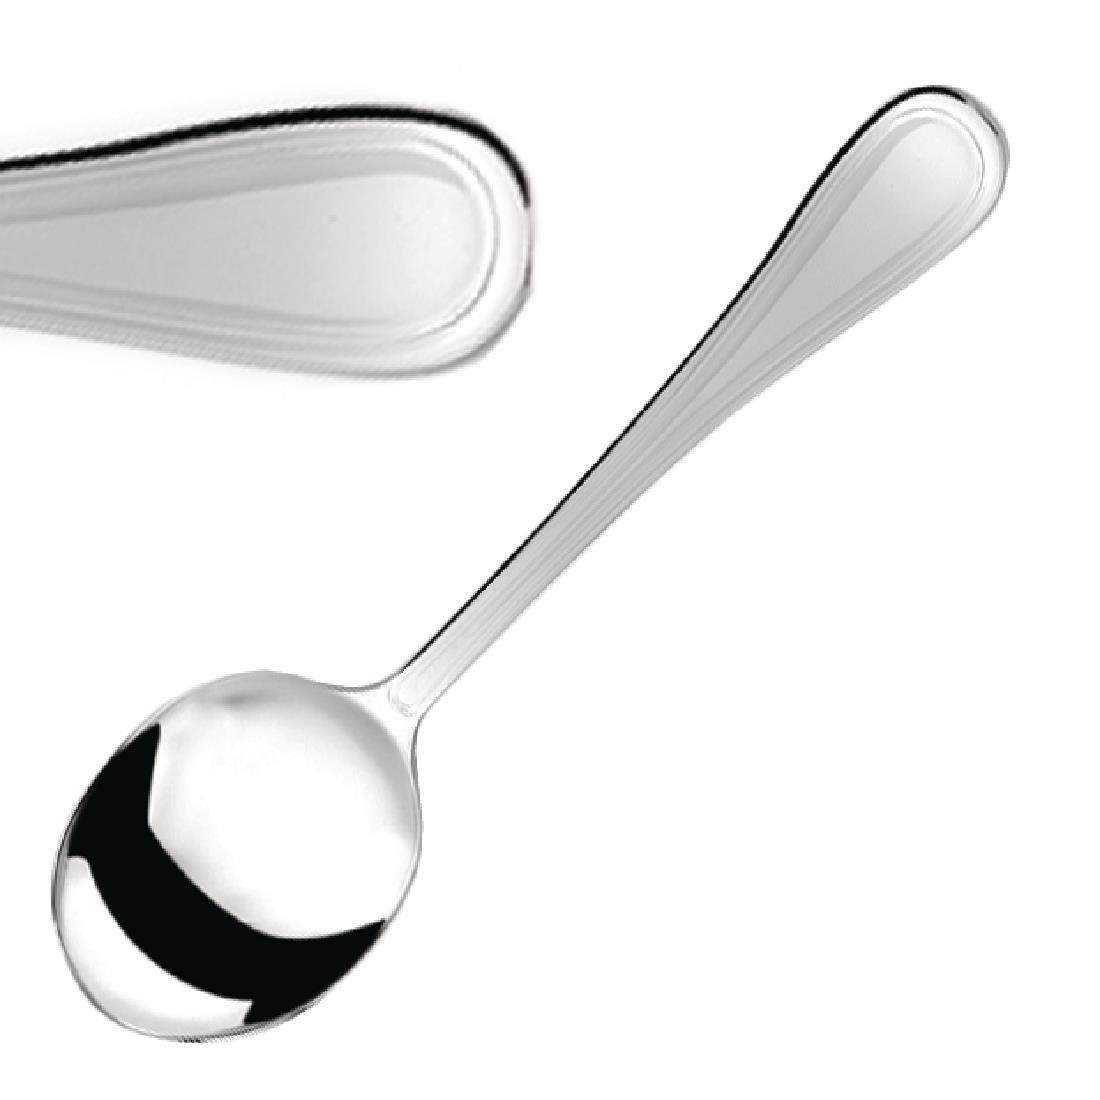 Elia Reed Soup Spoon (Pack of 12) - CL844  - 1